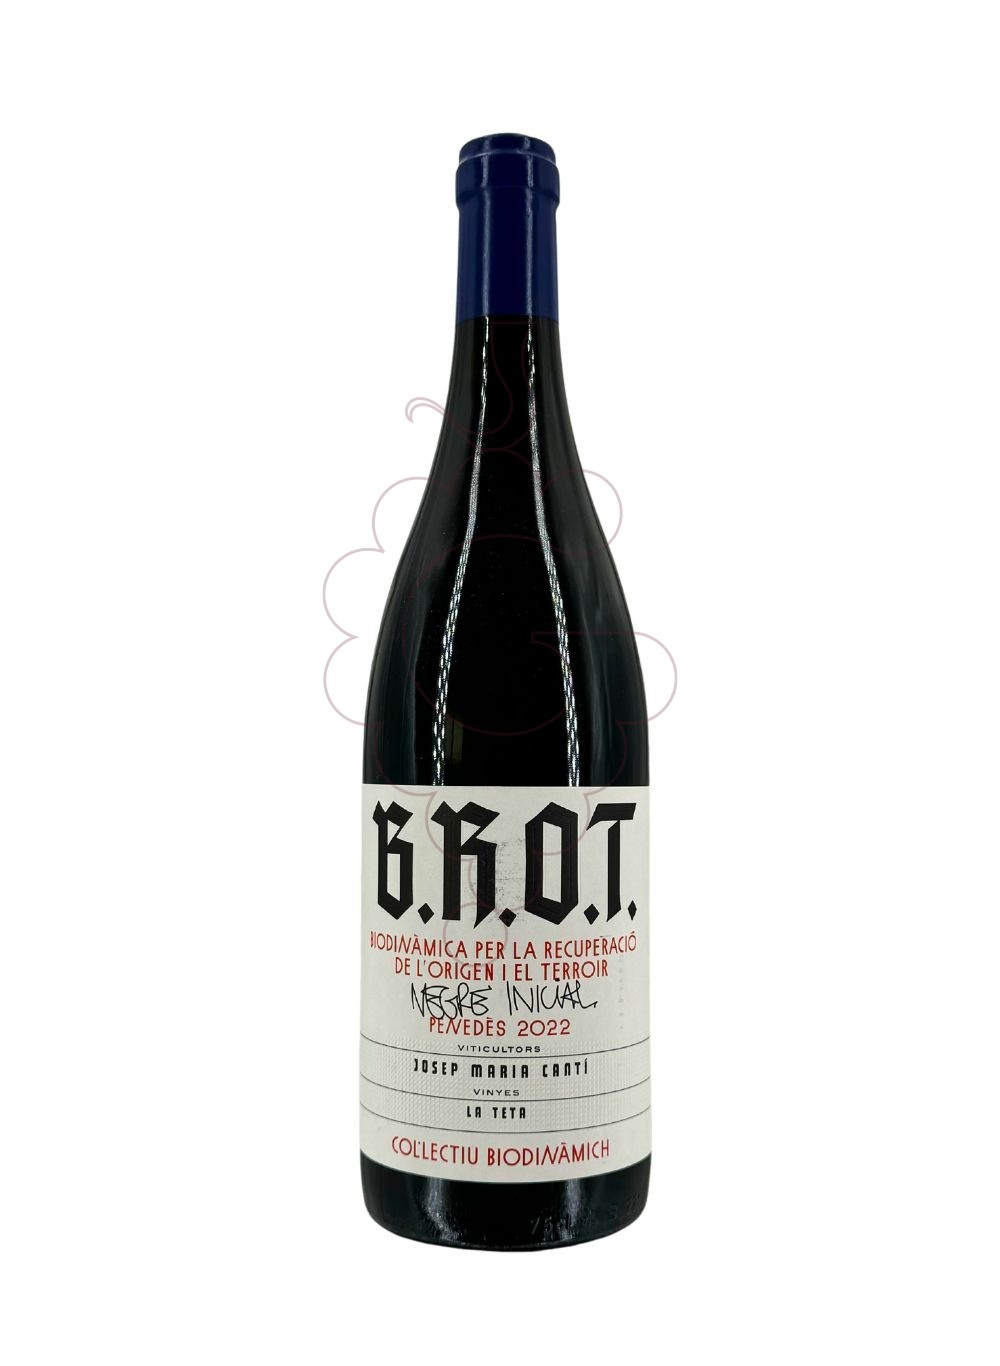 Photo B.R.O.T. Negre Inicial vin rouge